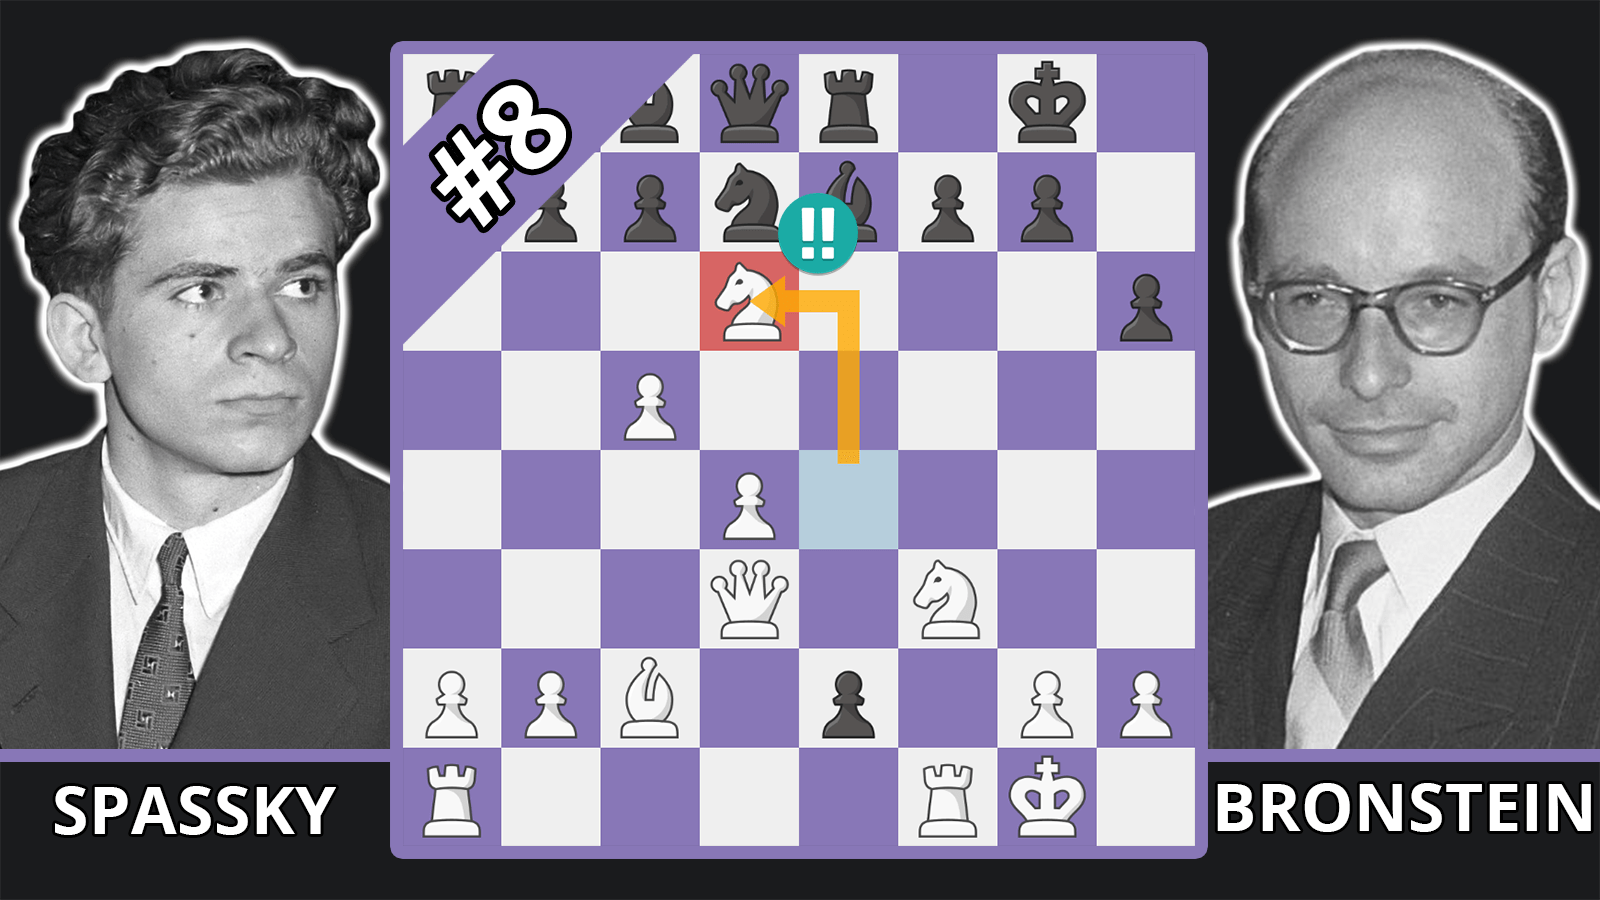 Chess.com on X: ♖ In 1960, Boris Spassky and Bobby Fischer faced off in a  game that would be the beginning of their friendship. ♖ Watch us break down  the game move